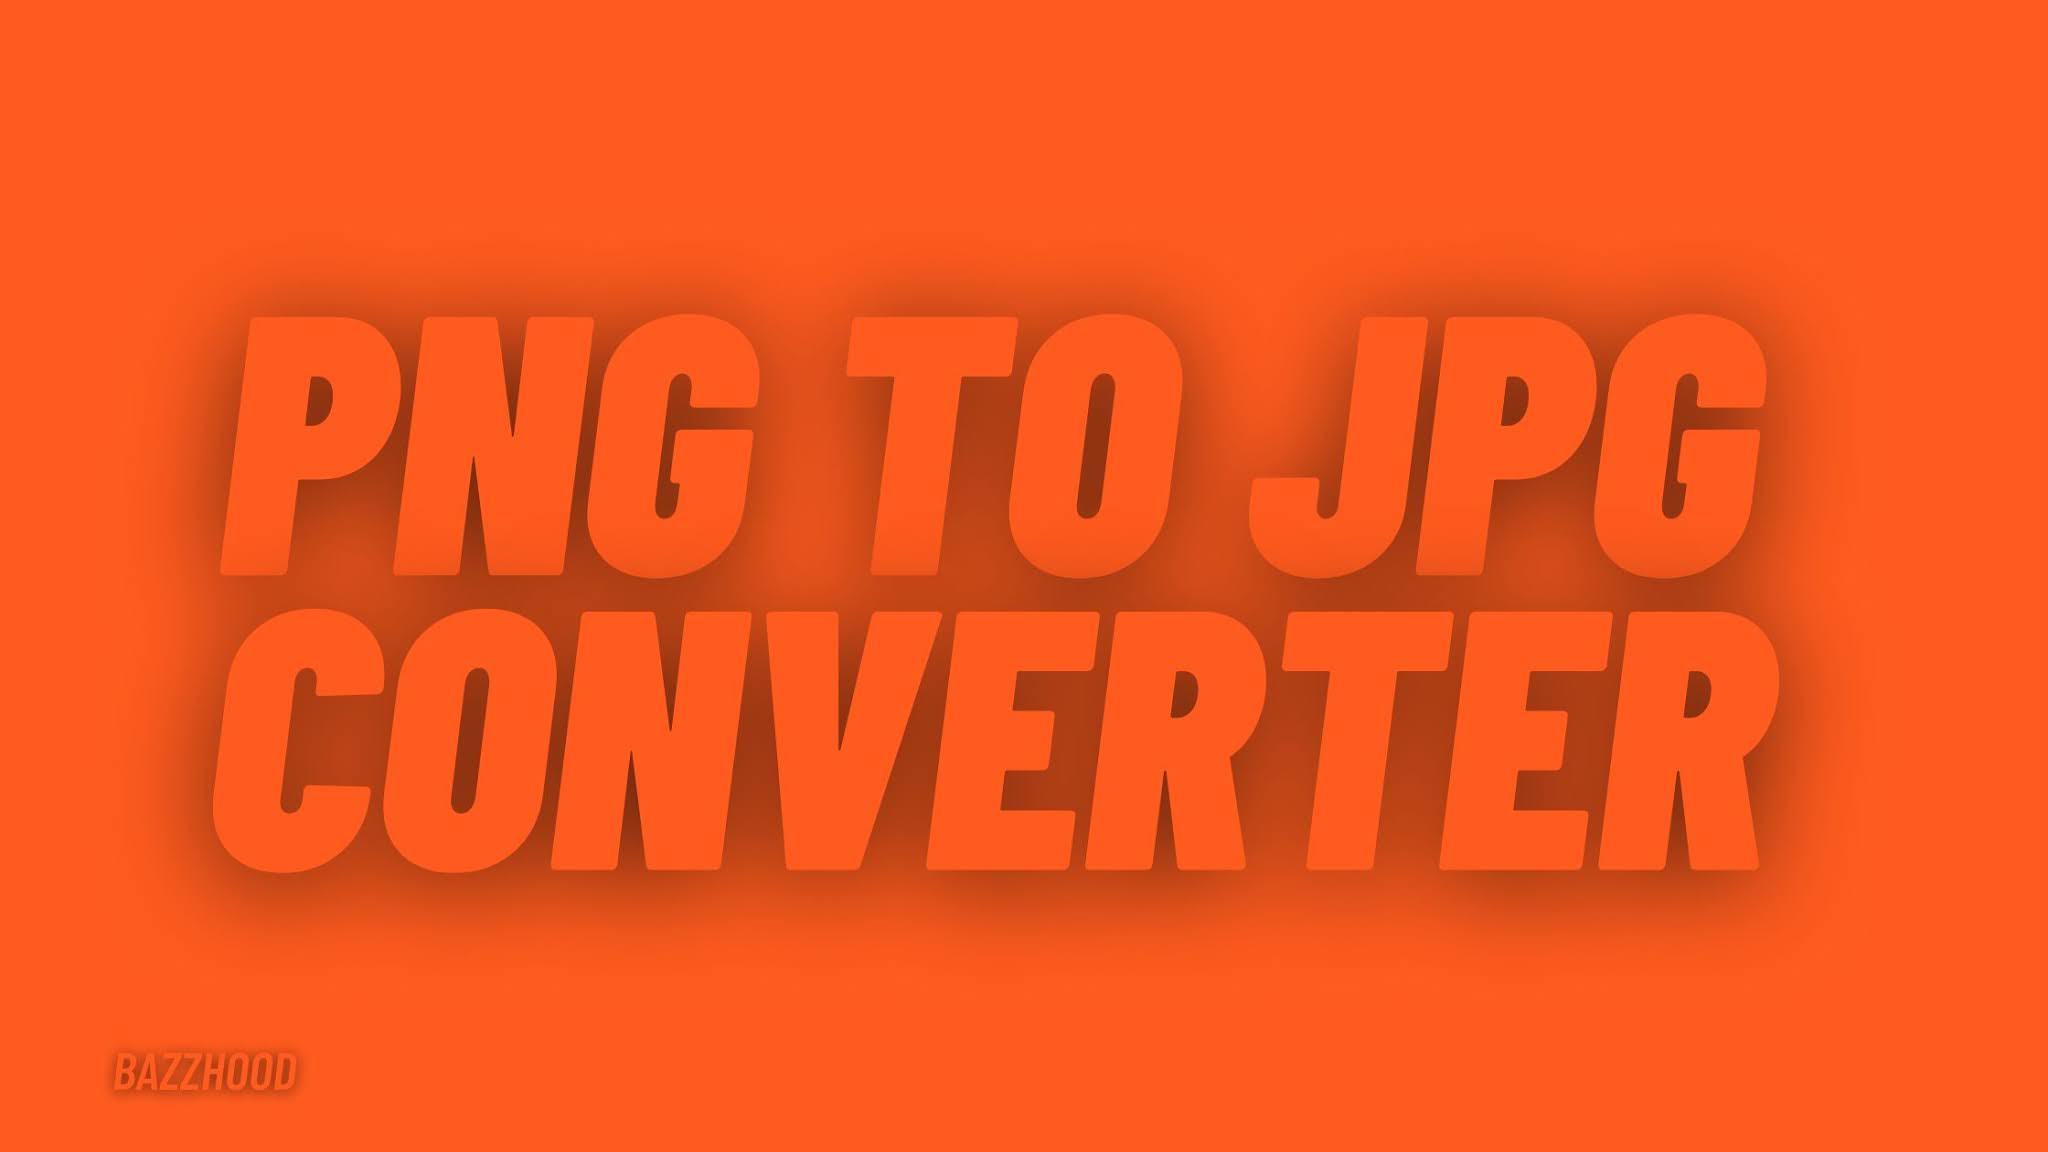 png to jpg converter